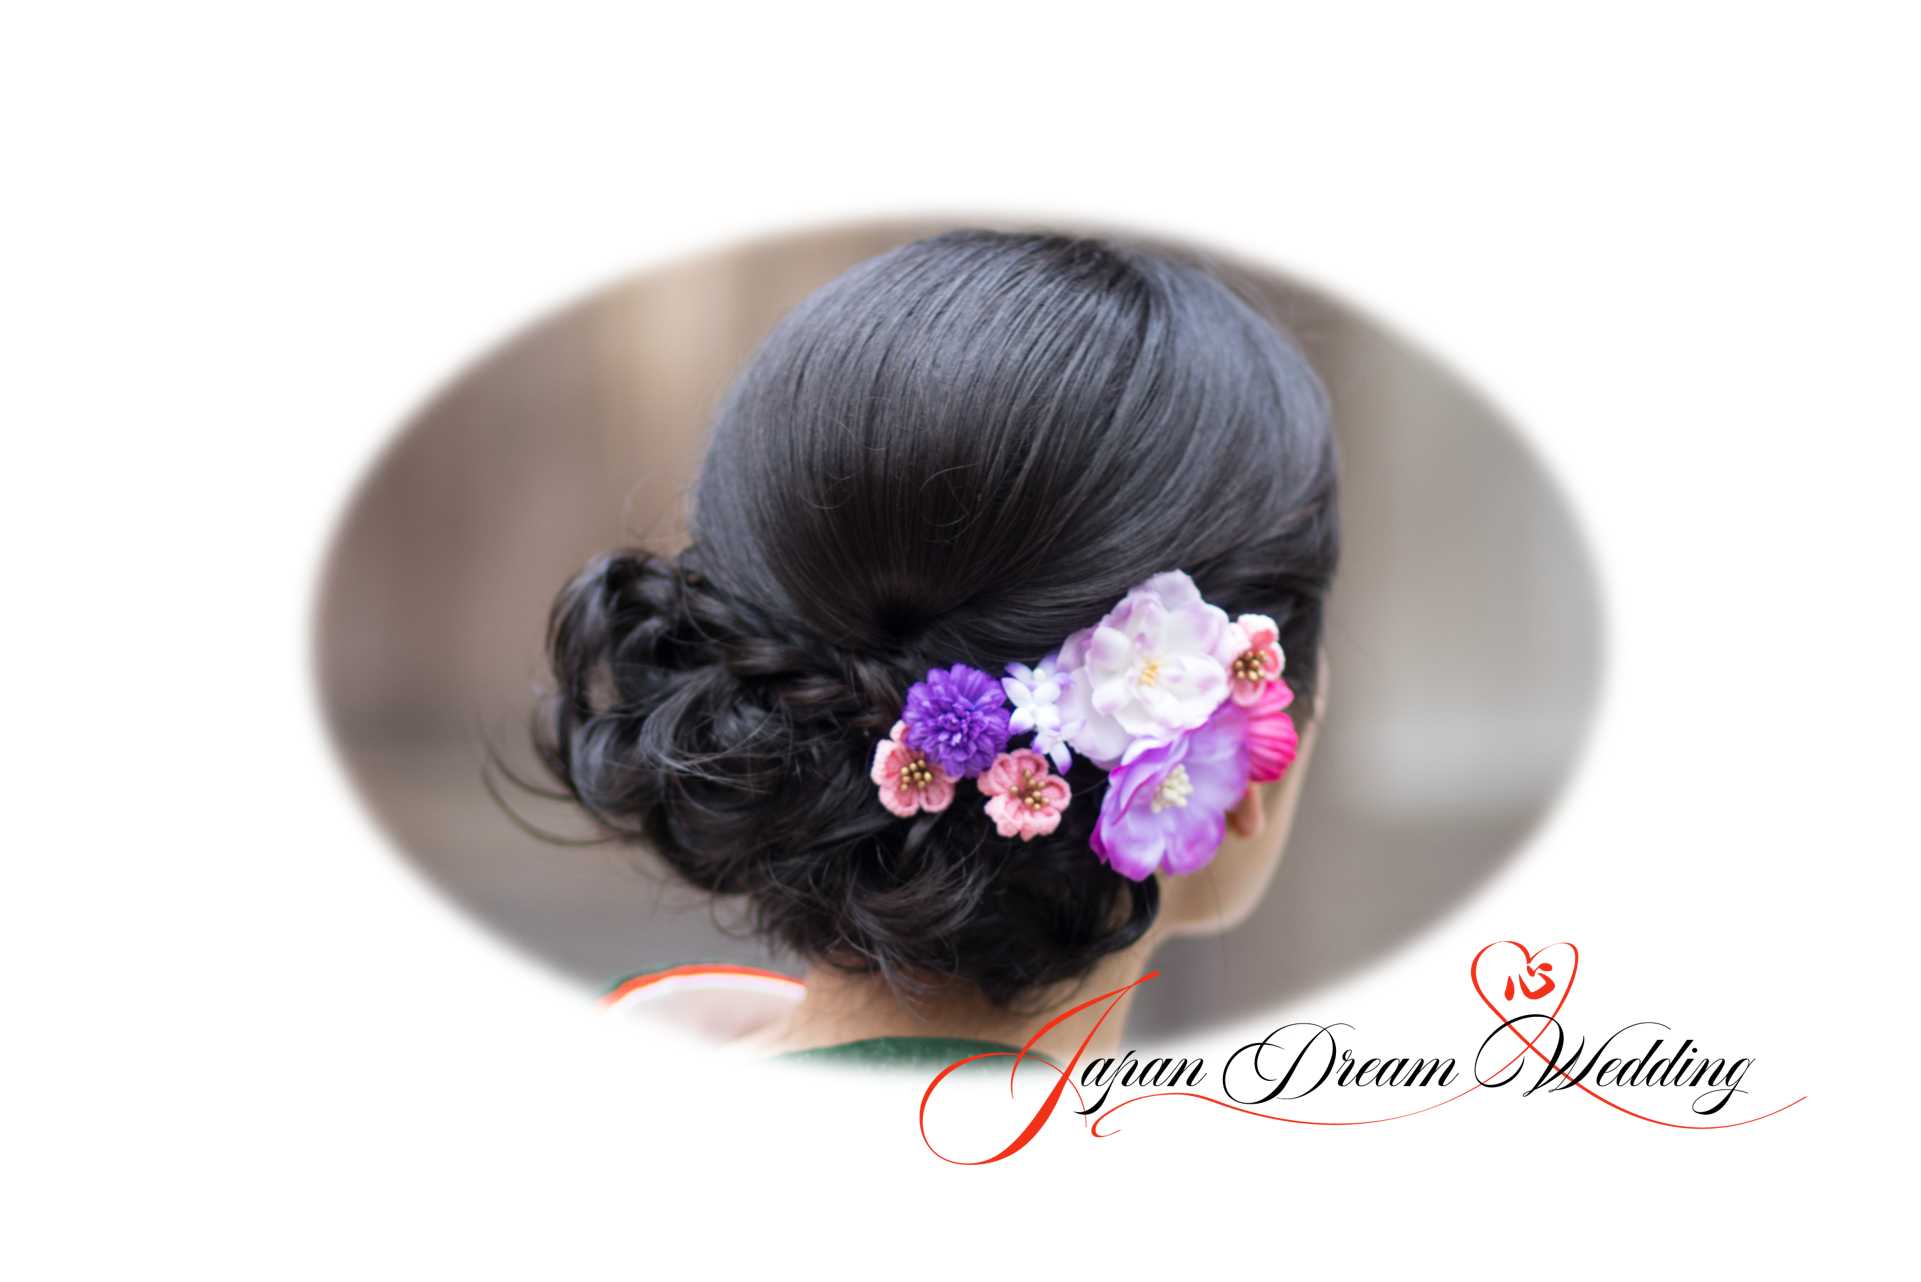 Japan Dream Wedding Hair and Makeup Services